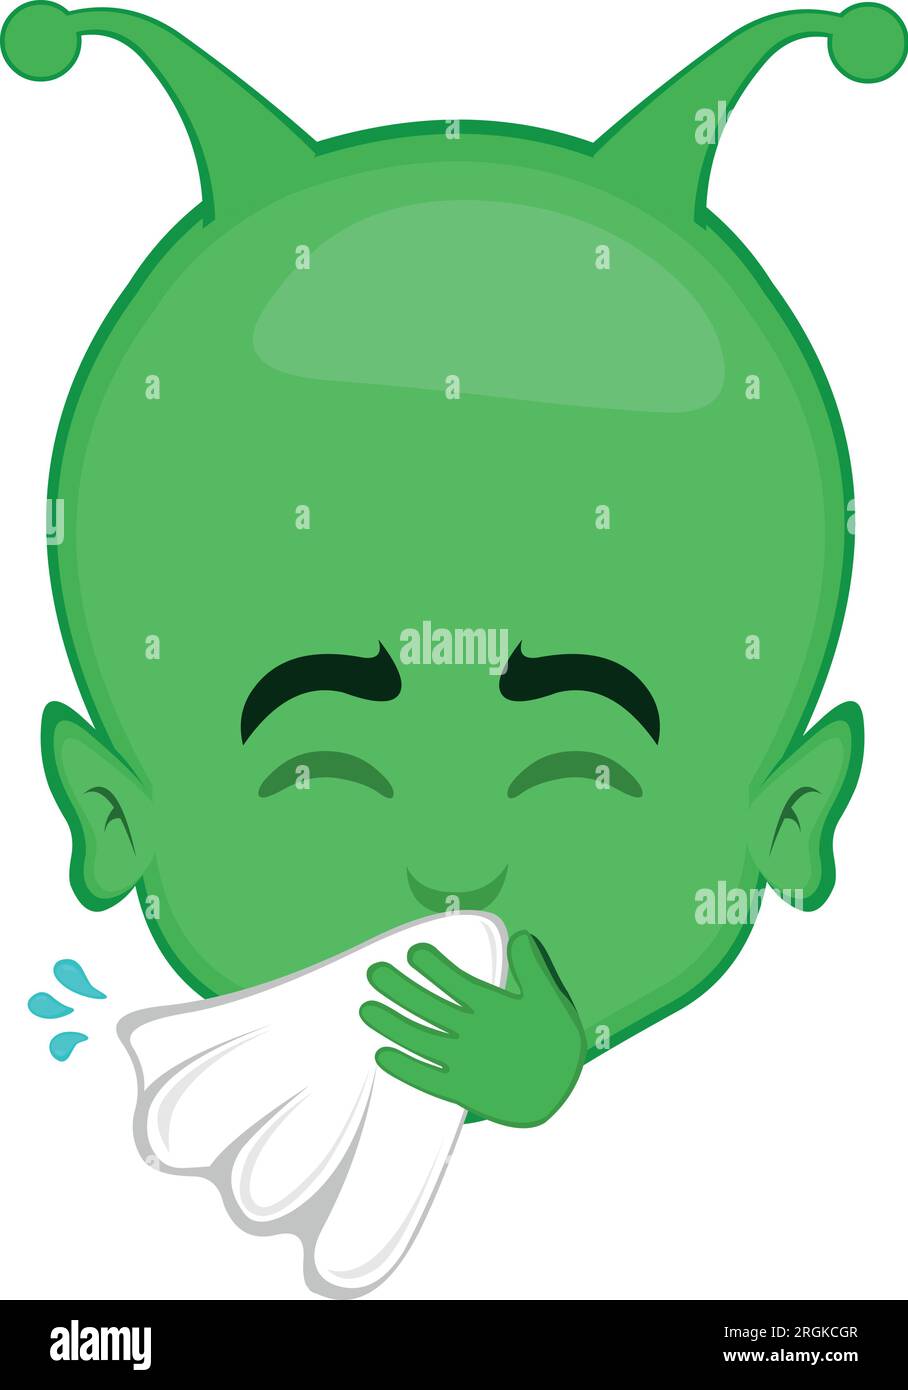 vector illustration face alien or extraterrestrial cartoon sneezing with a handkerchief on the nose Stock Vector